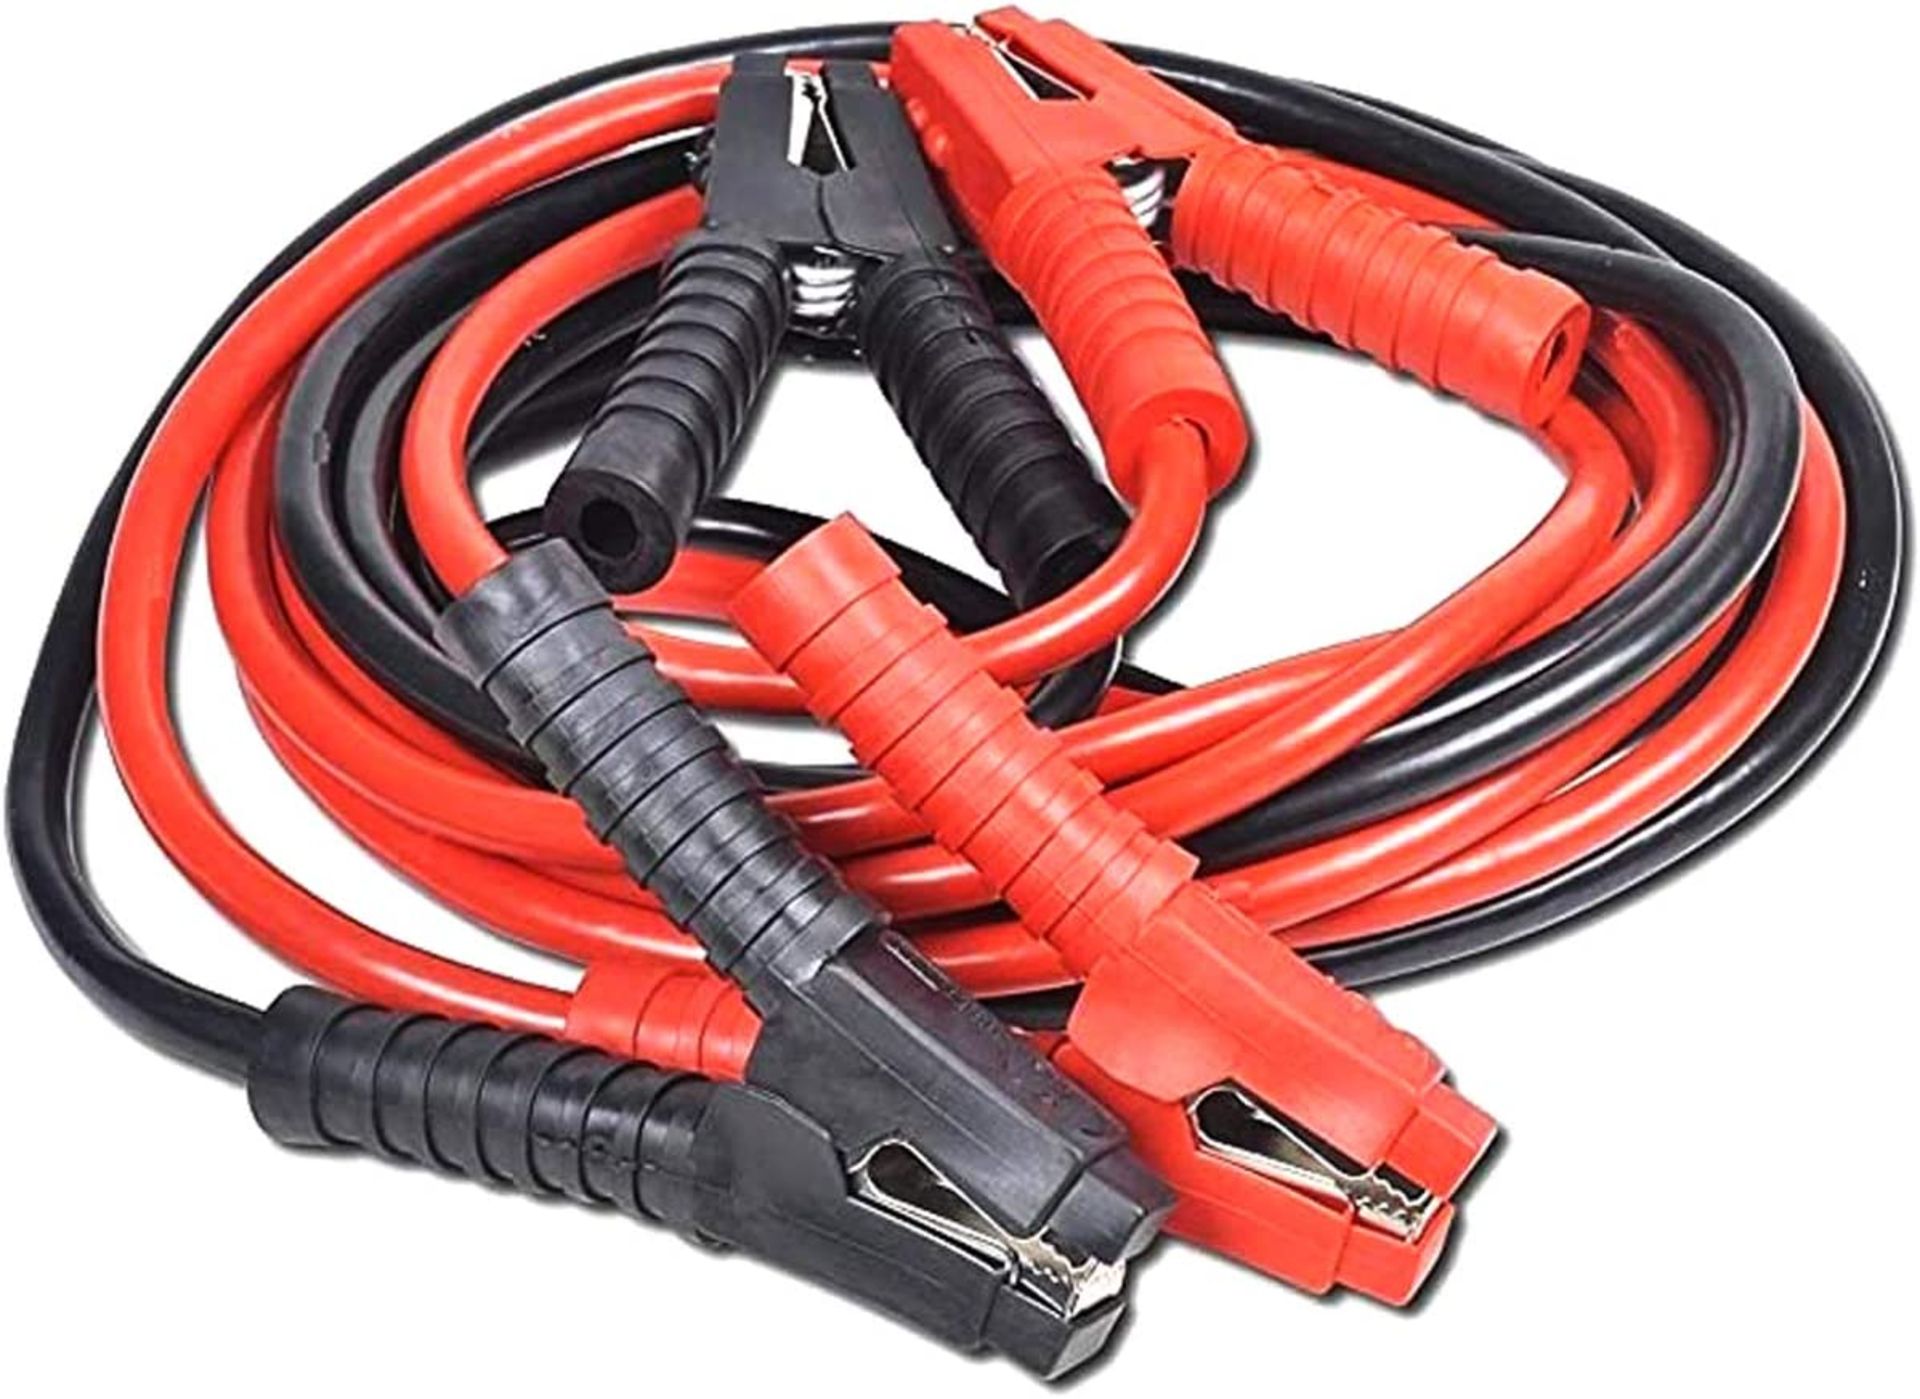 10 x Brookstone 3M Booster Cables